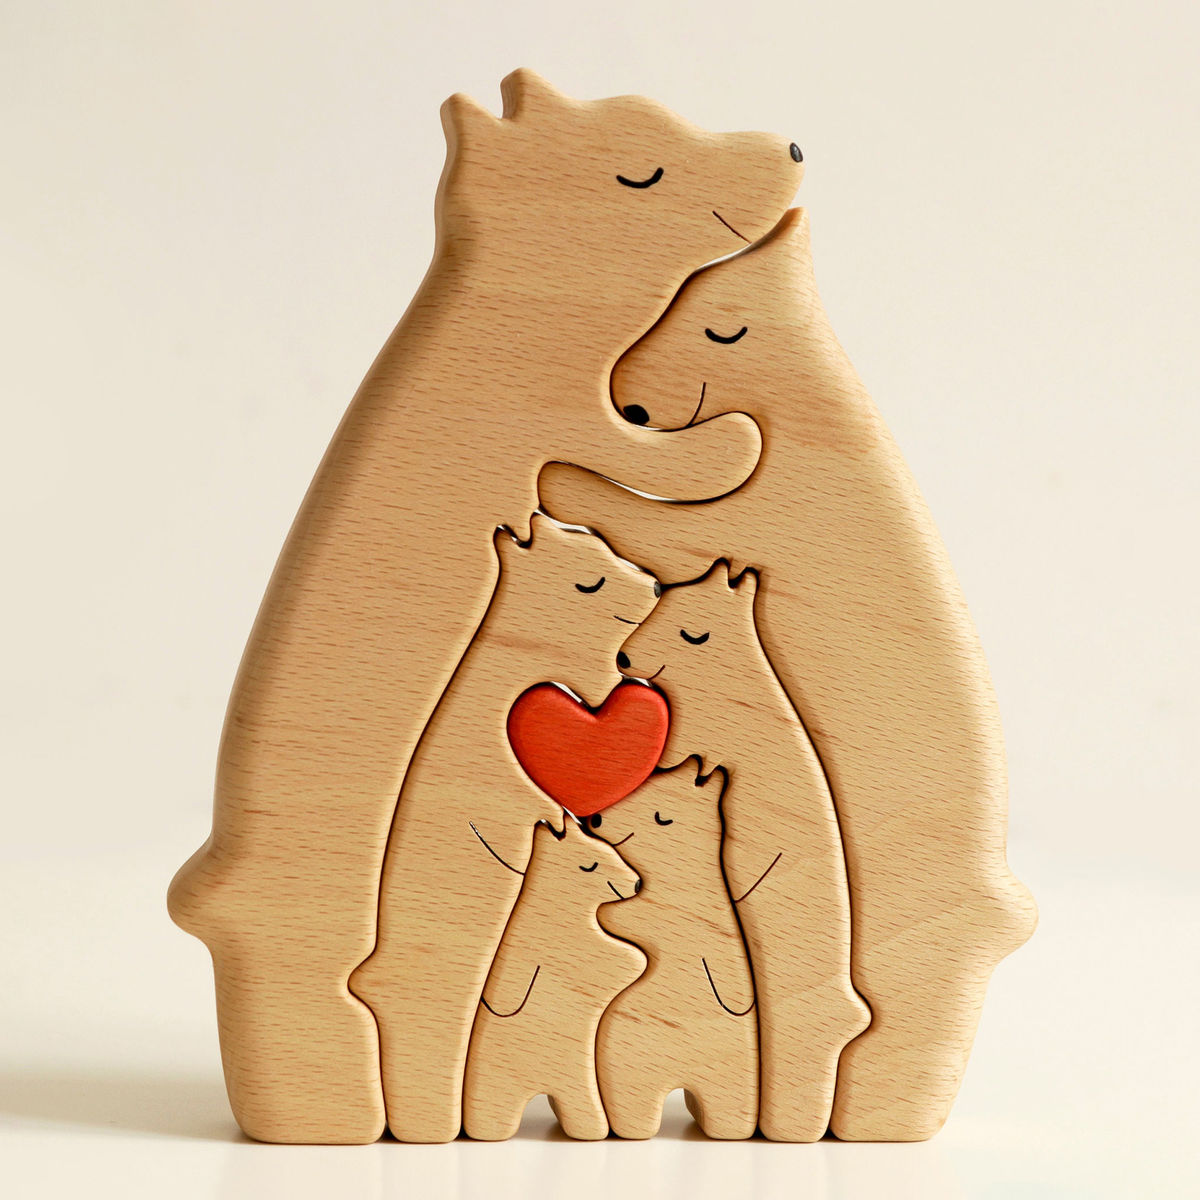 Wooden Bears family puzzle - Up to 6 Kids - Christmas Decor, Family Keepsake Gift, Home Decor_4